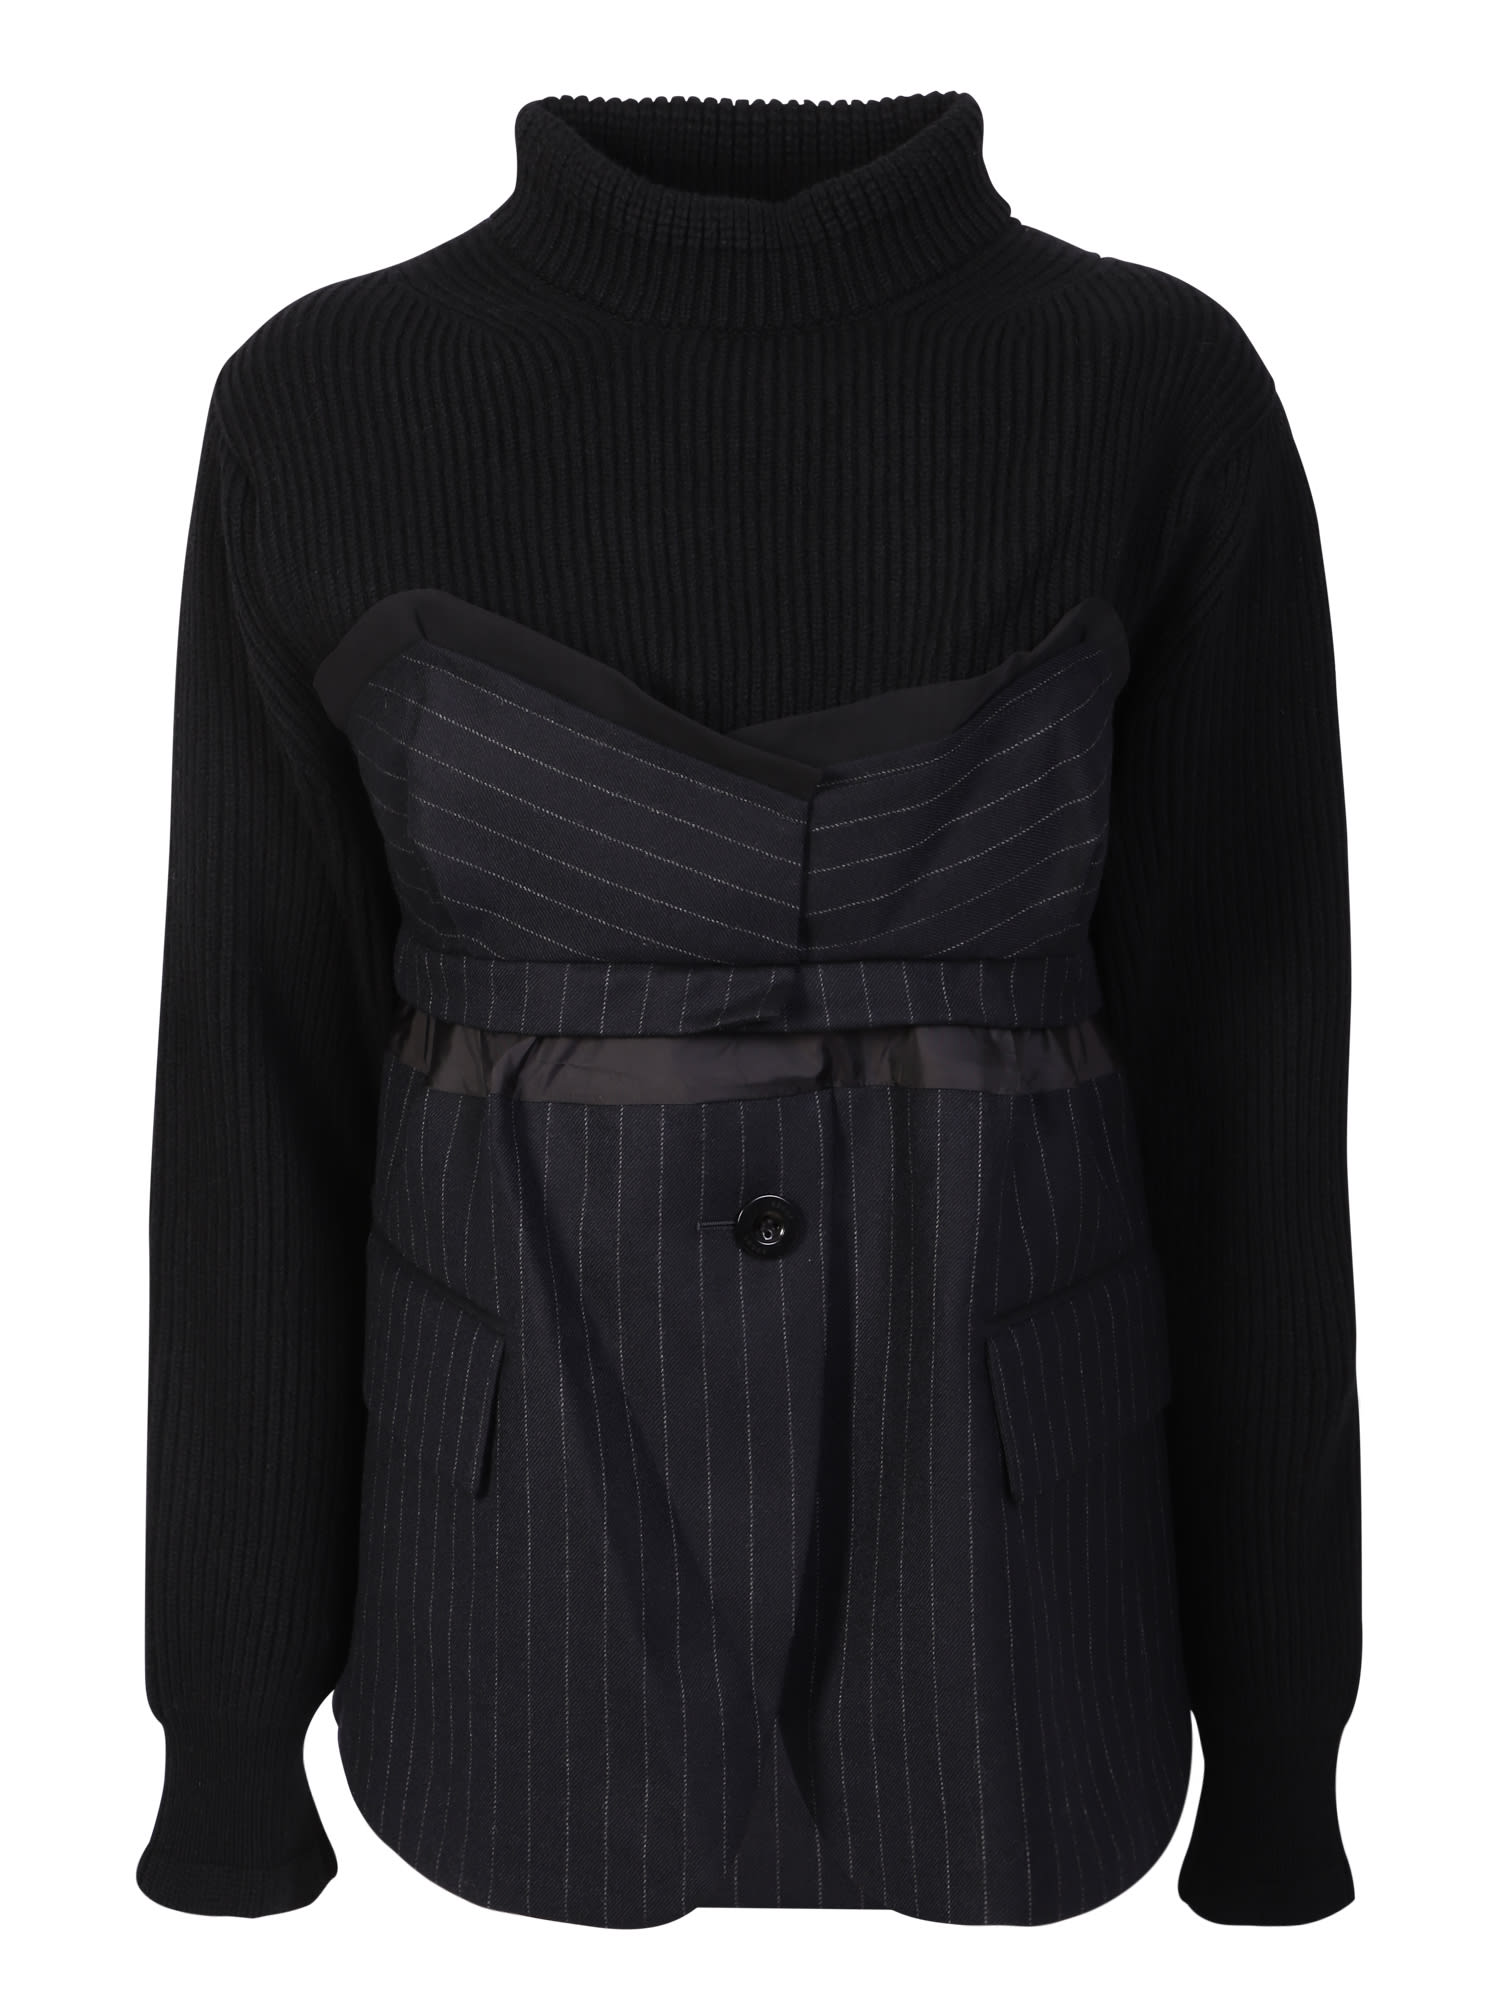 Sacai Jumper Embellished With Blazer At The Bottom